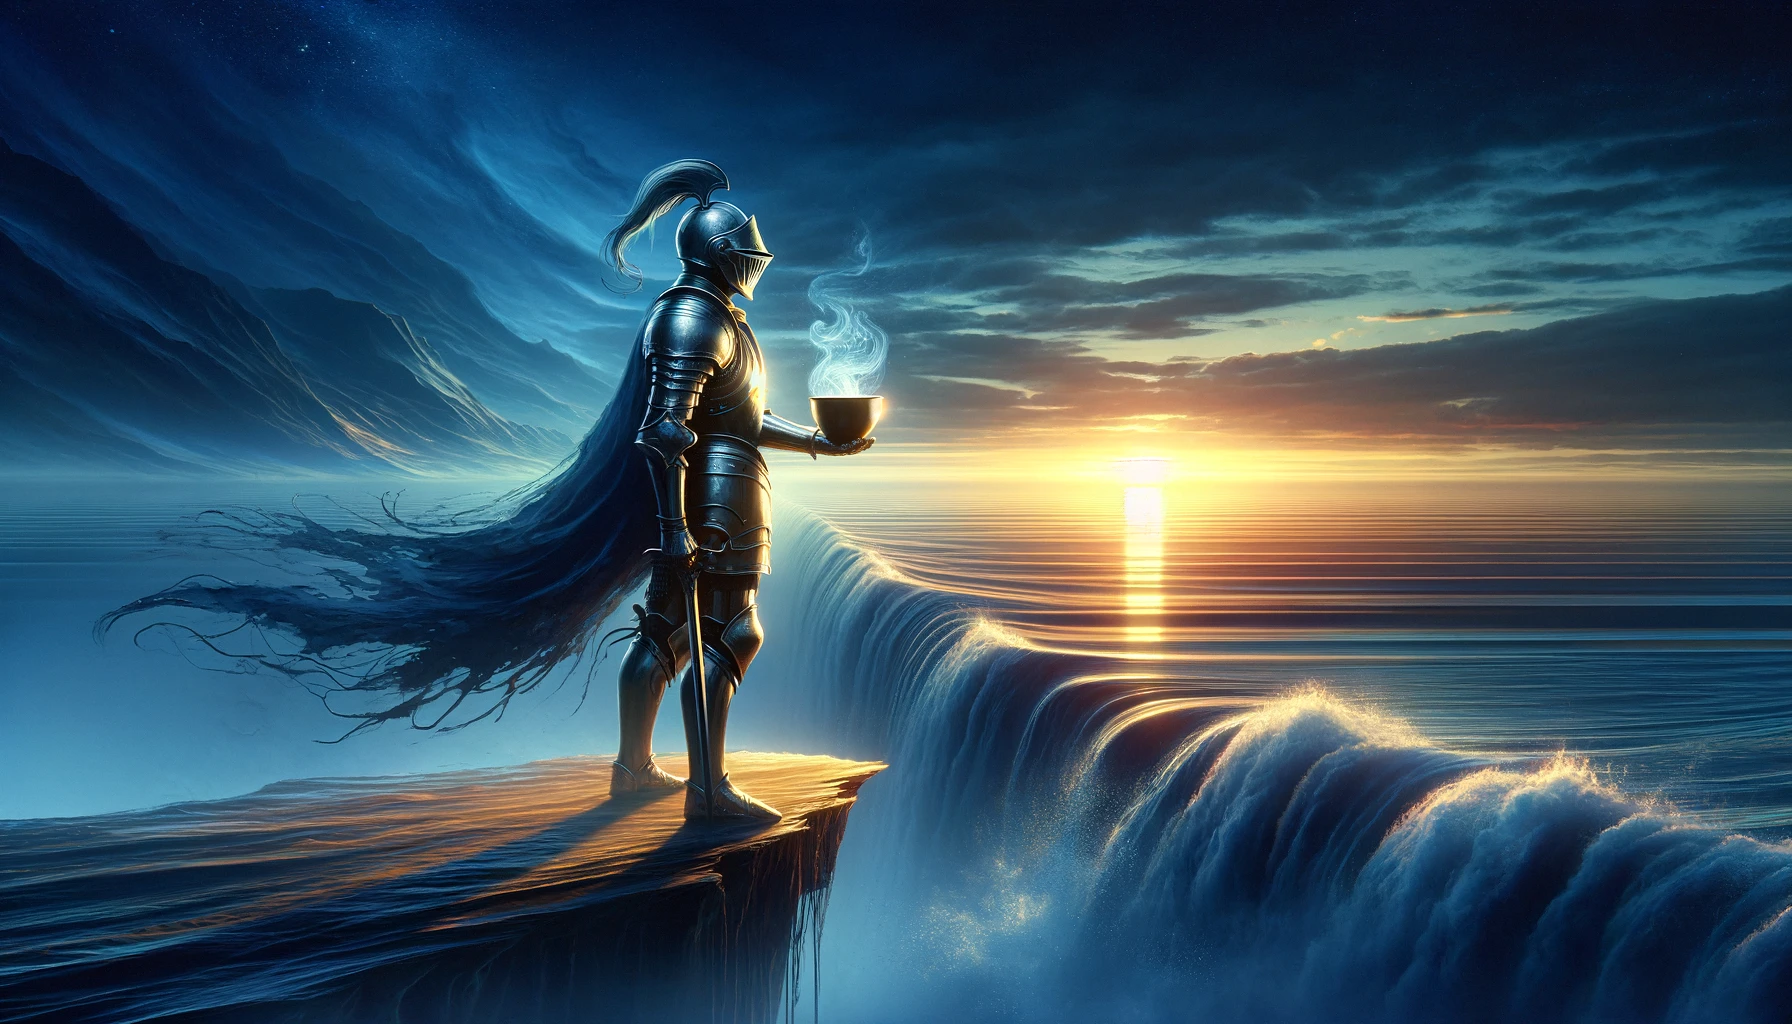 An image showcasing a knight in shining armor standing at the edge of a vast ocean holding a cup overflowing with emotions. The knight is depicted a